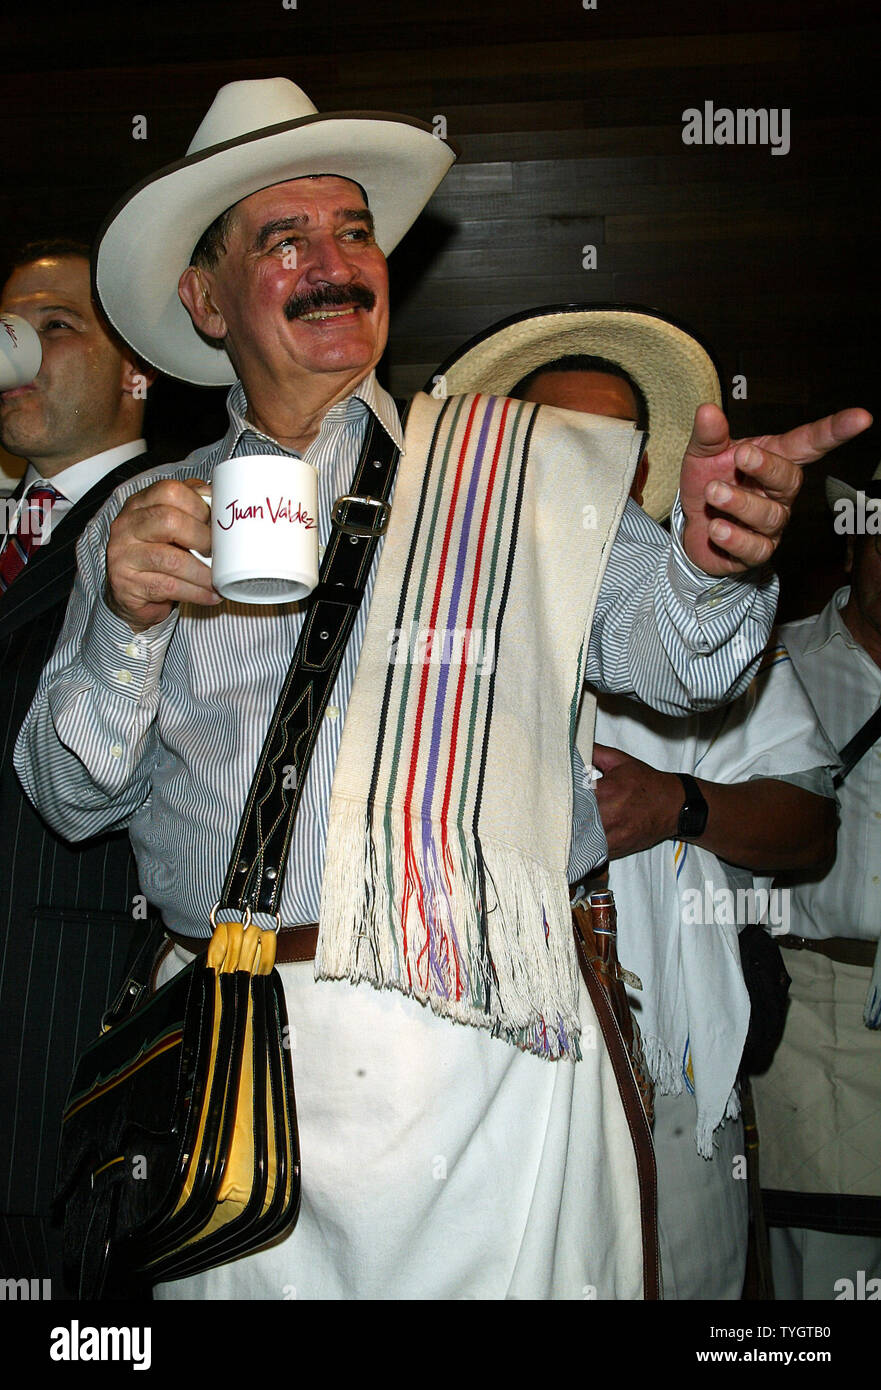 Juan Valdez, the icon of Colombian coffee, poses for pictures at the opening of the Juan Valdez Cafe in New York in New York on September 28, 2004.  (UPI Photo/Laura Cavanaugh) Stock Photo